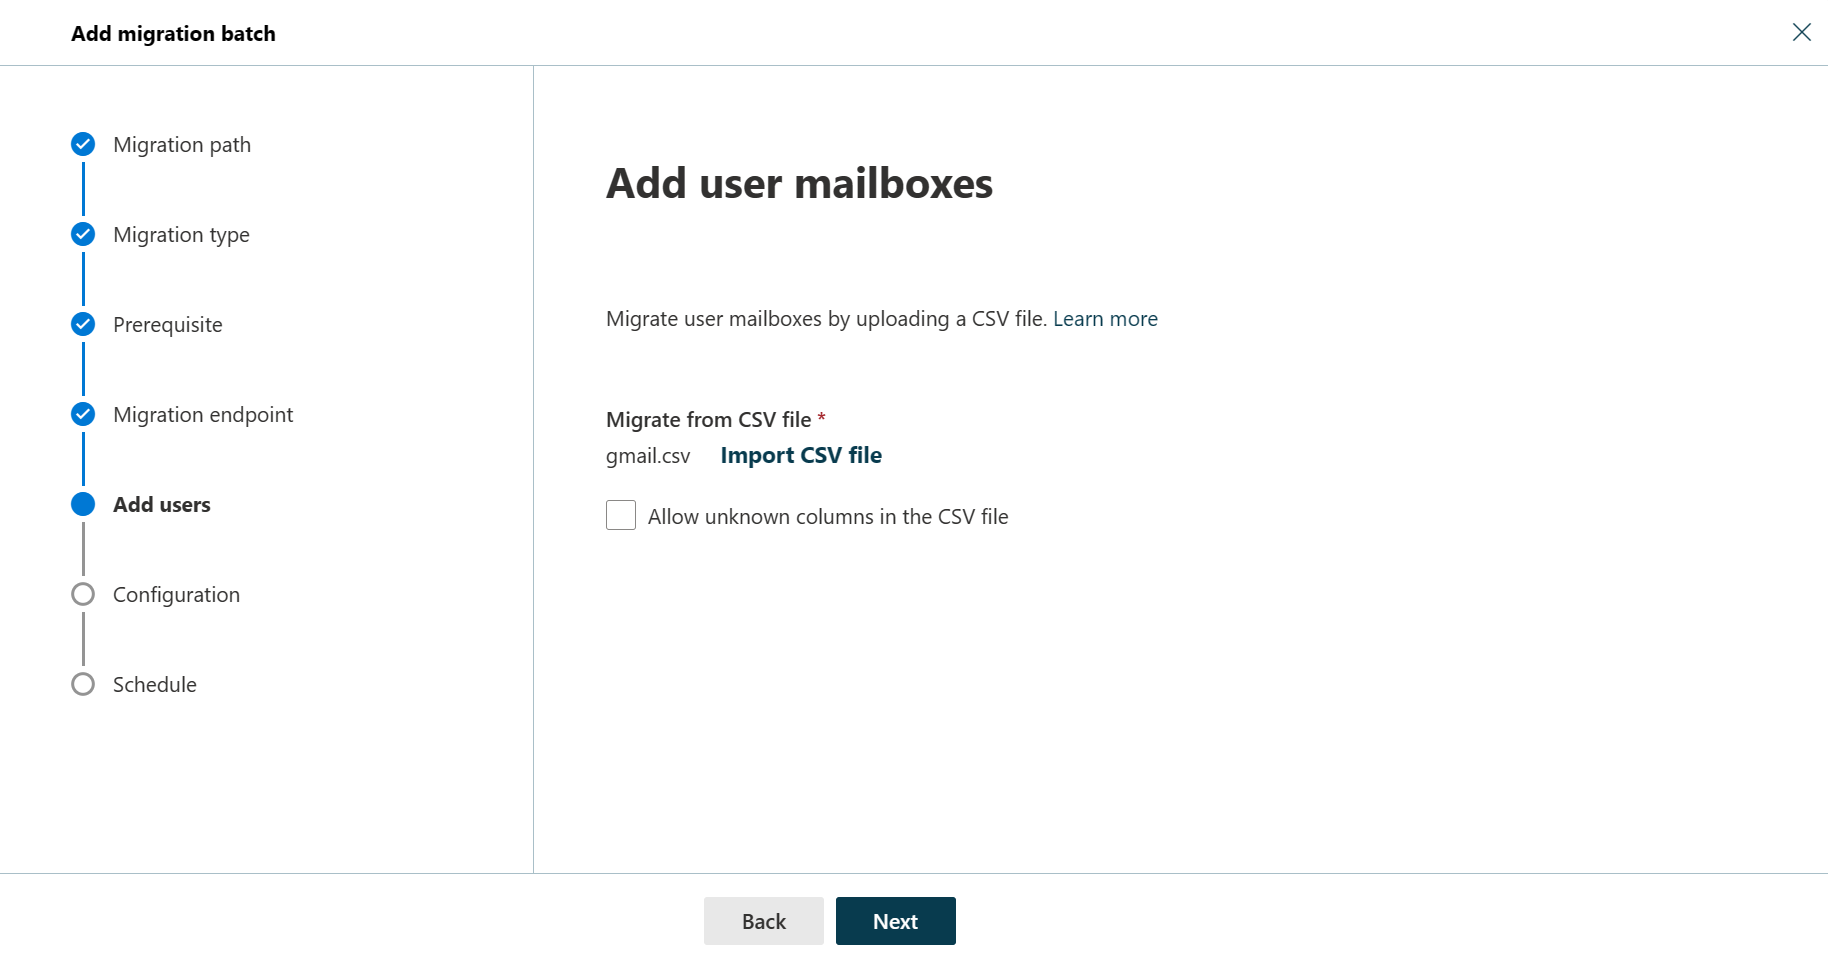 Screenshot of the fifth step of the Add migration batch wizard where the user can add user mailboxes.